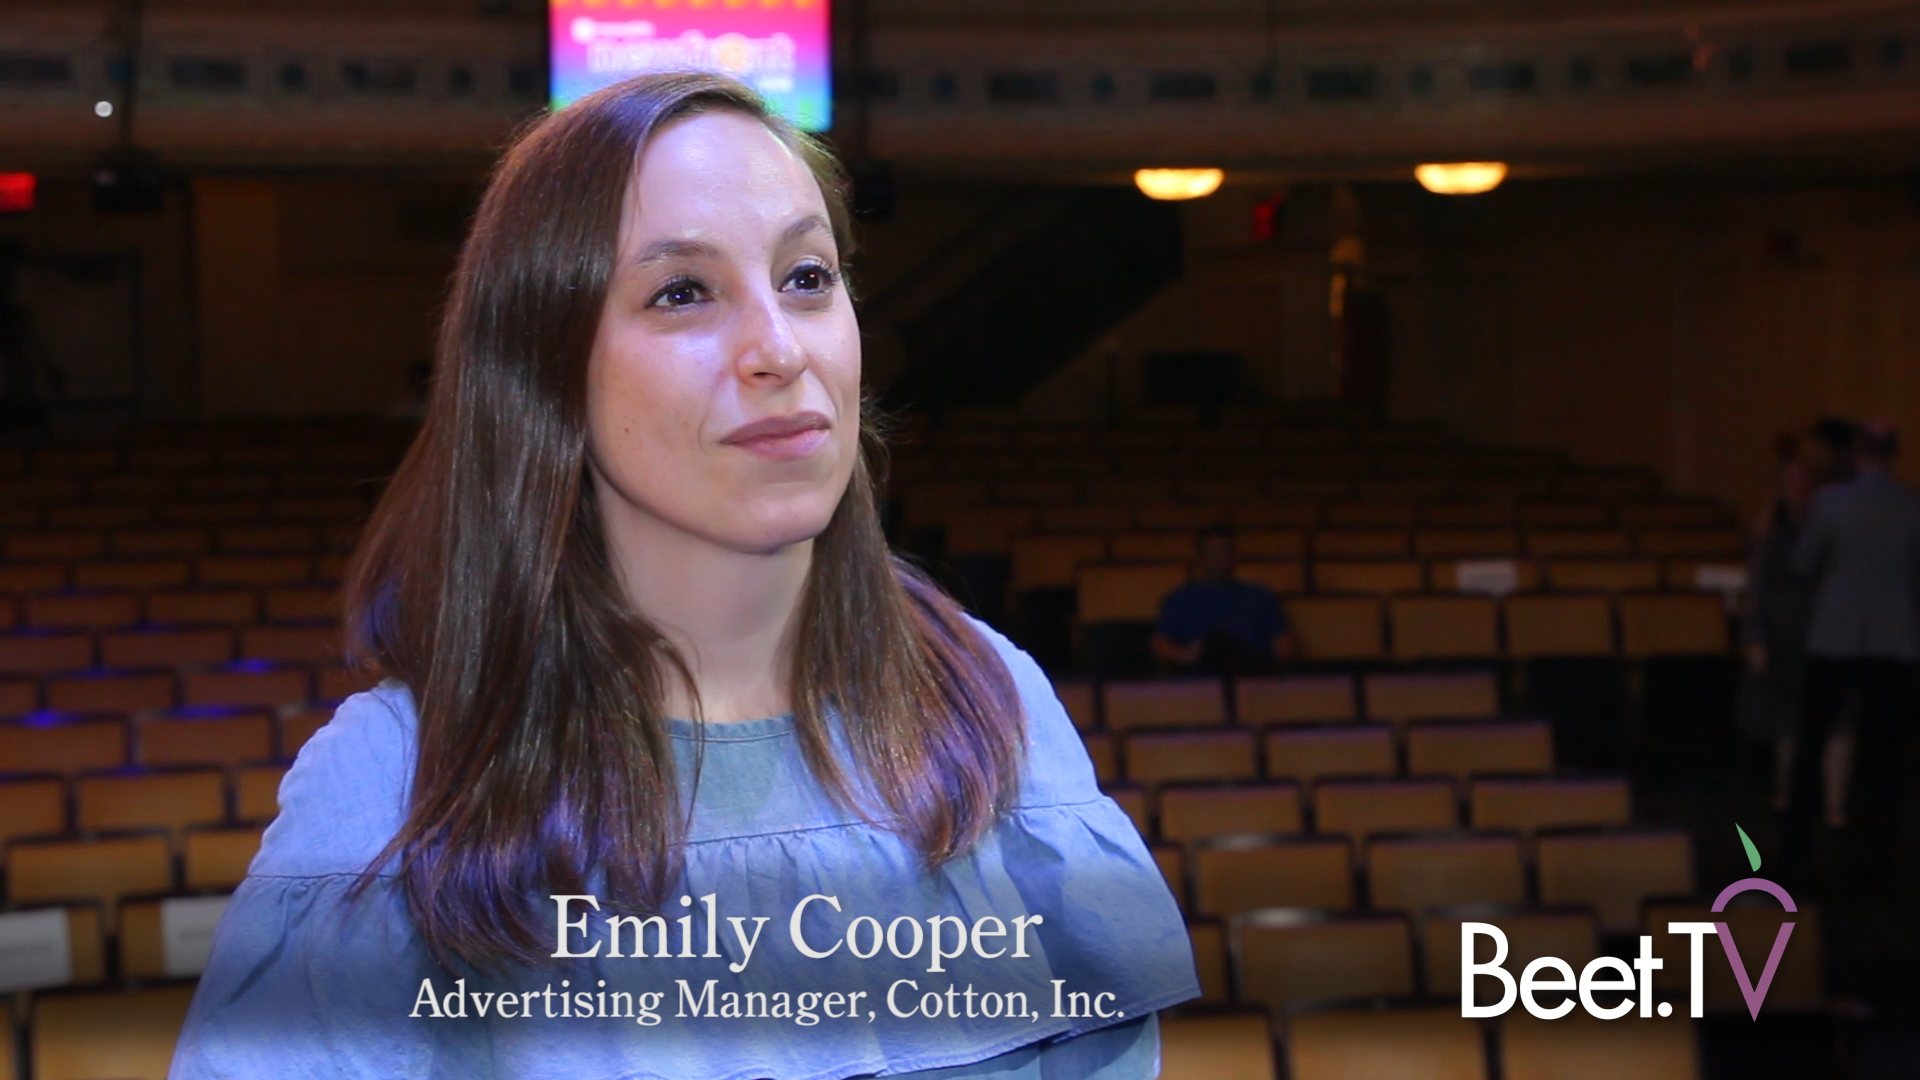 Cotton, Inc.’s Cooper On The ‘Tipping Point’ For Cause Marketing